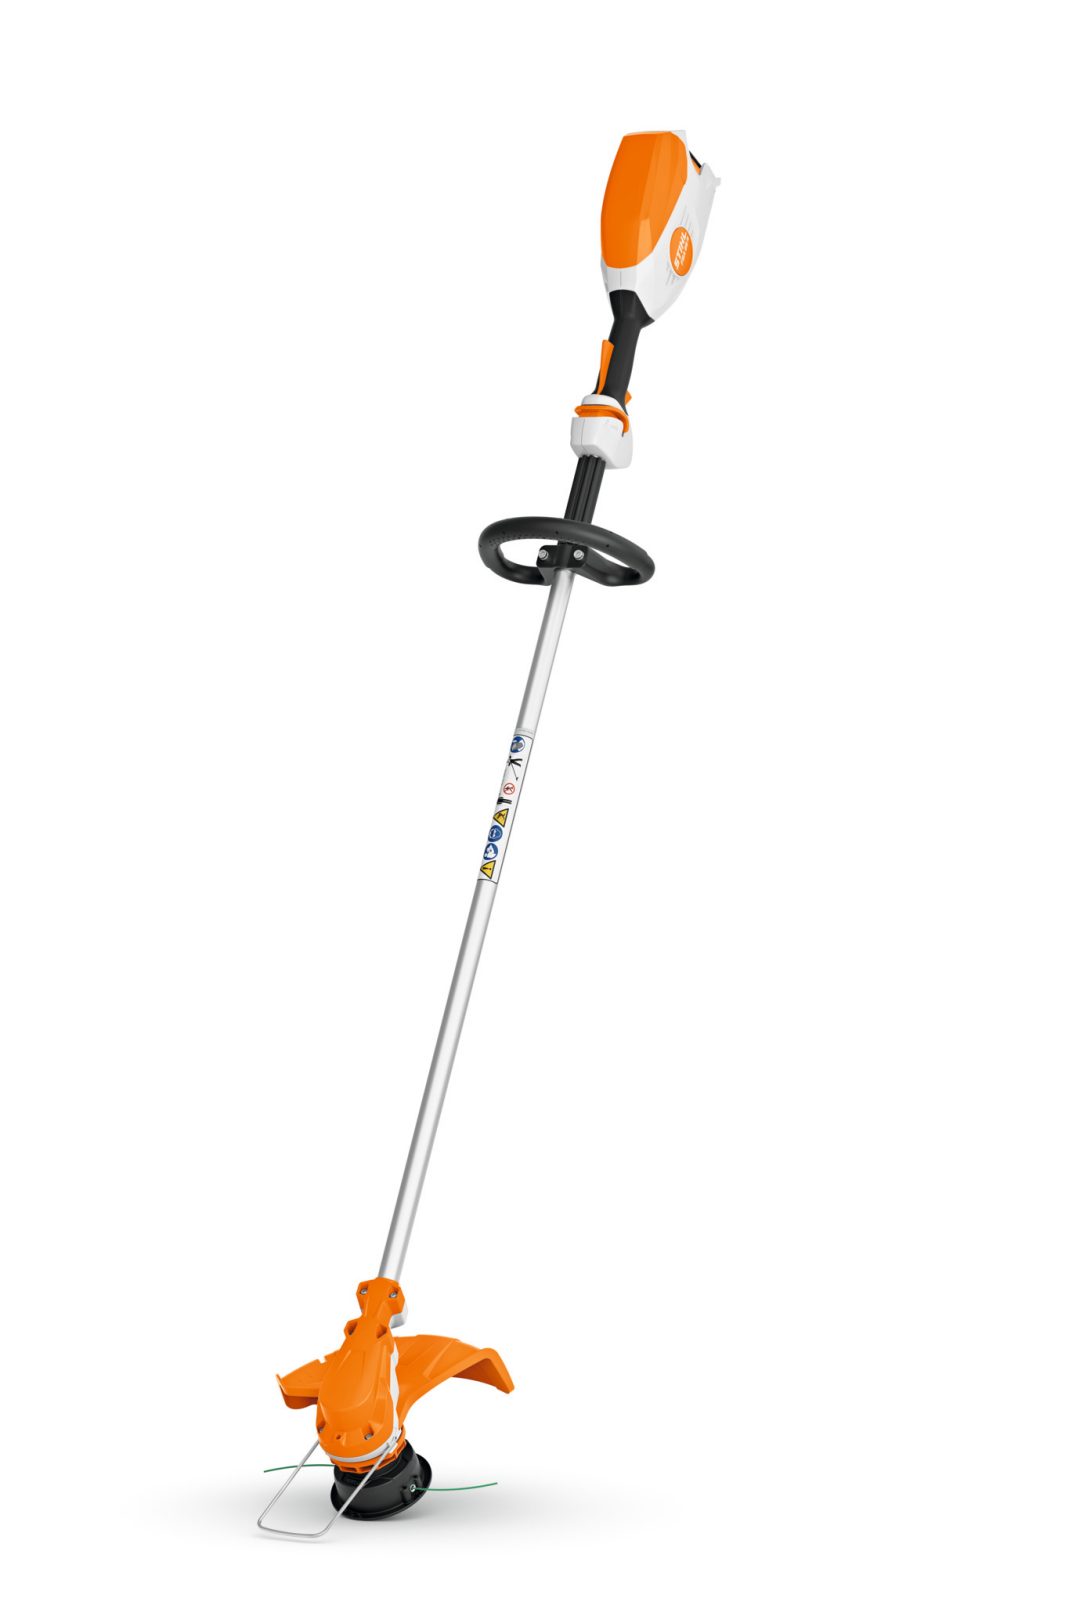 STIHL FSA 86 battery  brushcutter from the AP-System